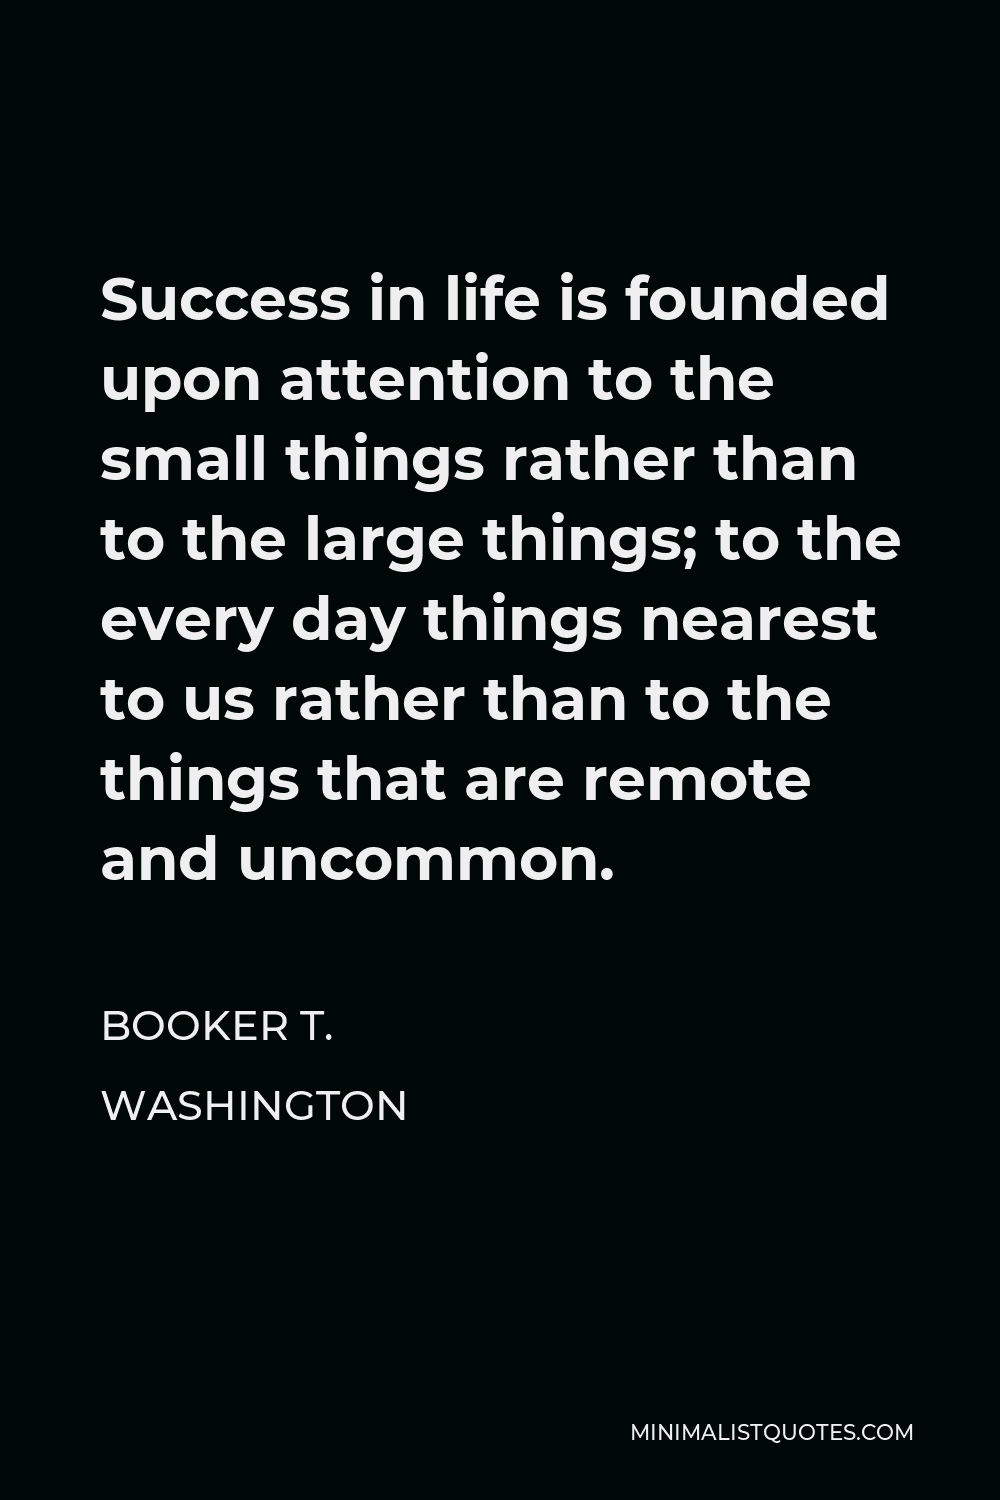 Booker T. Washington Quote - Success in life is founded upon attention to the small things rather than to the large things; to the every day things nearest to us rather than to the things that are remote and uncommon.